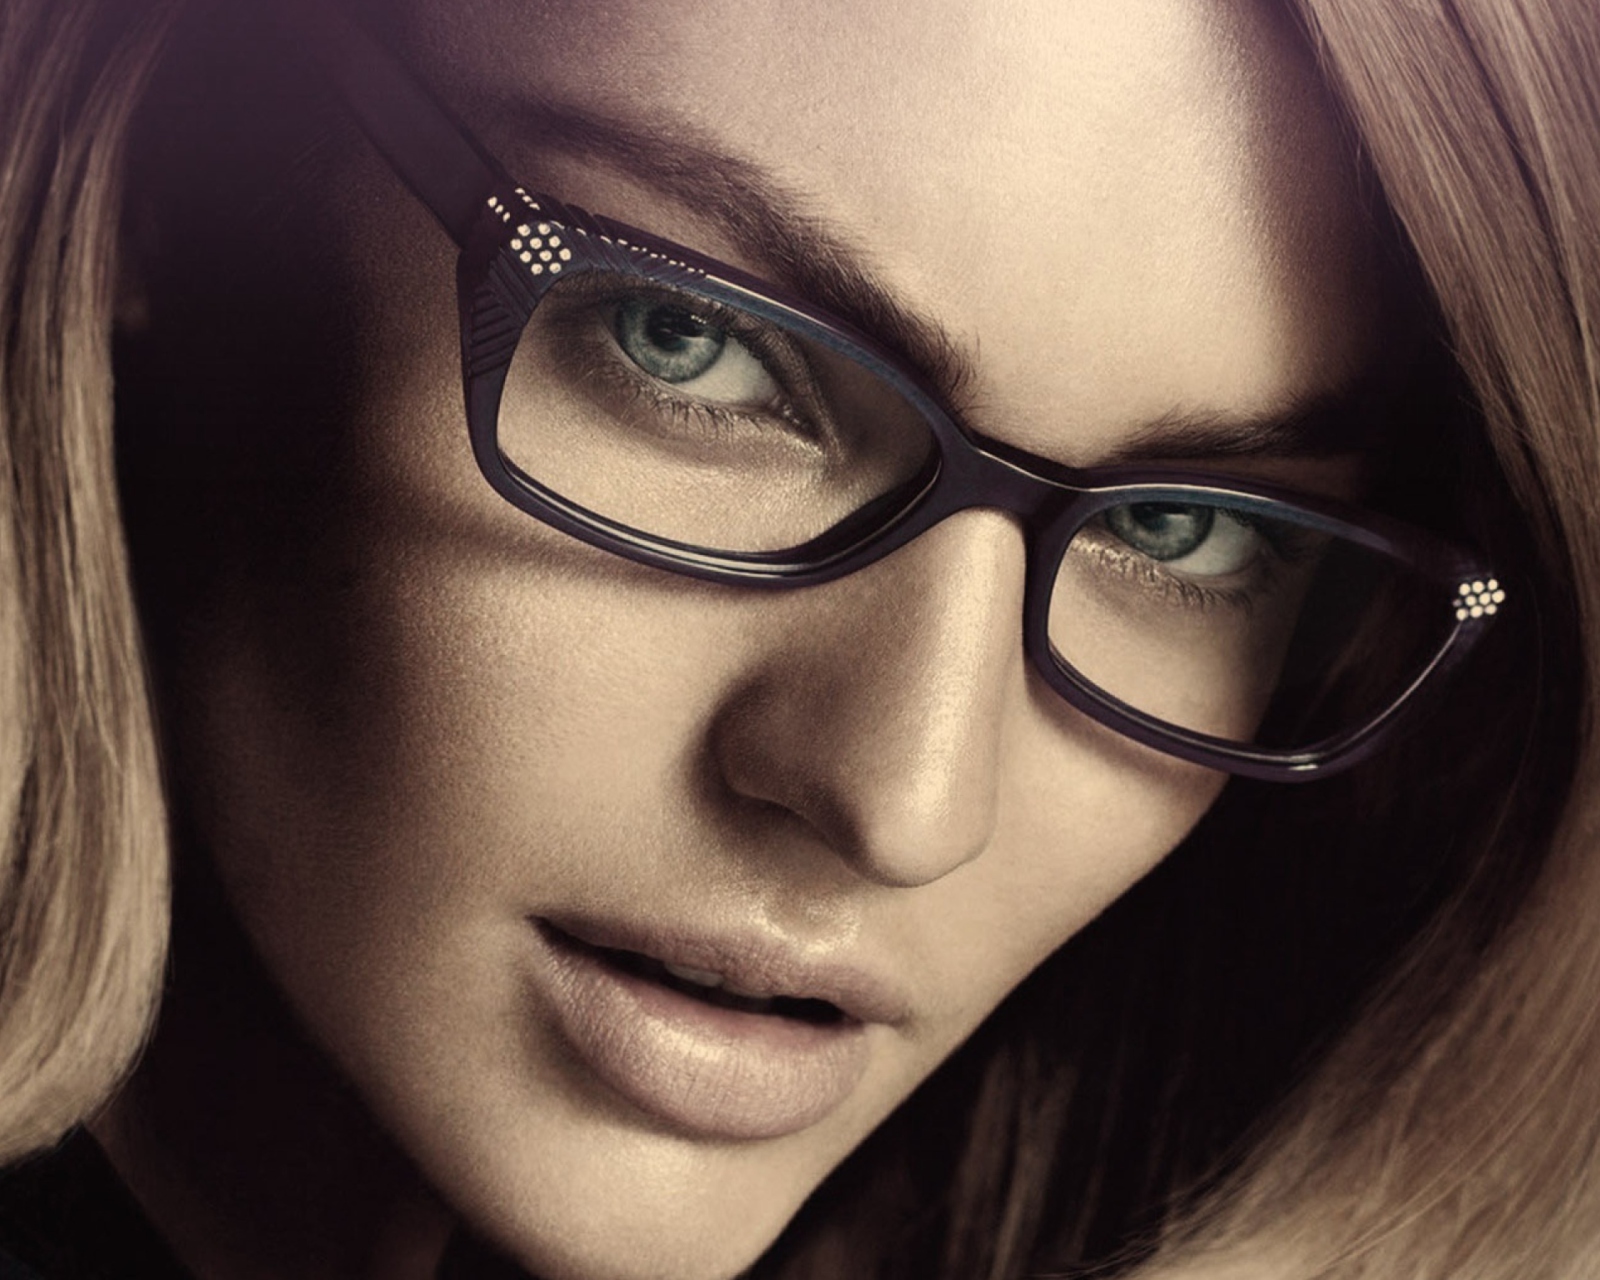 Candice Swanepoel In Glasses wallpaper 1600x1280